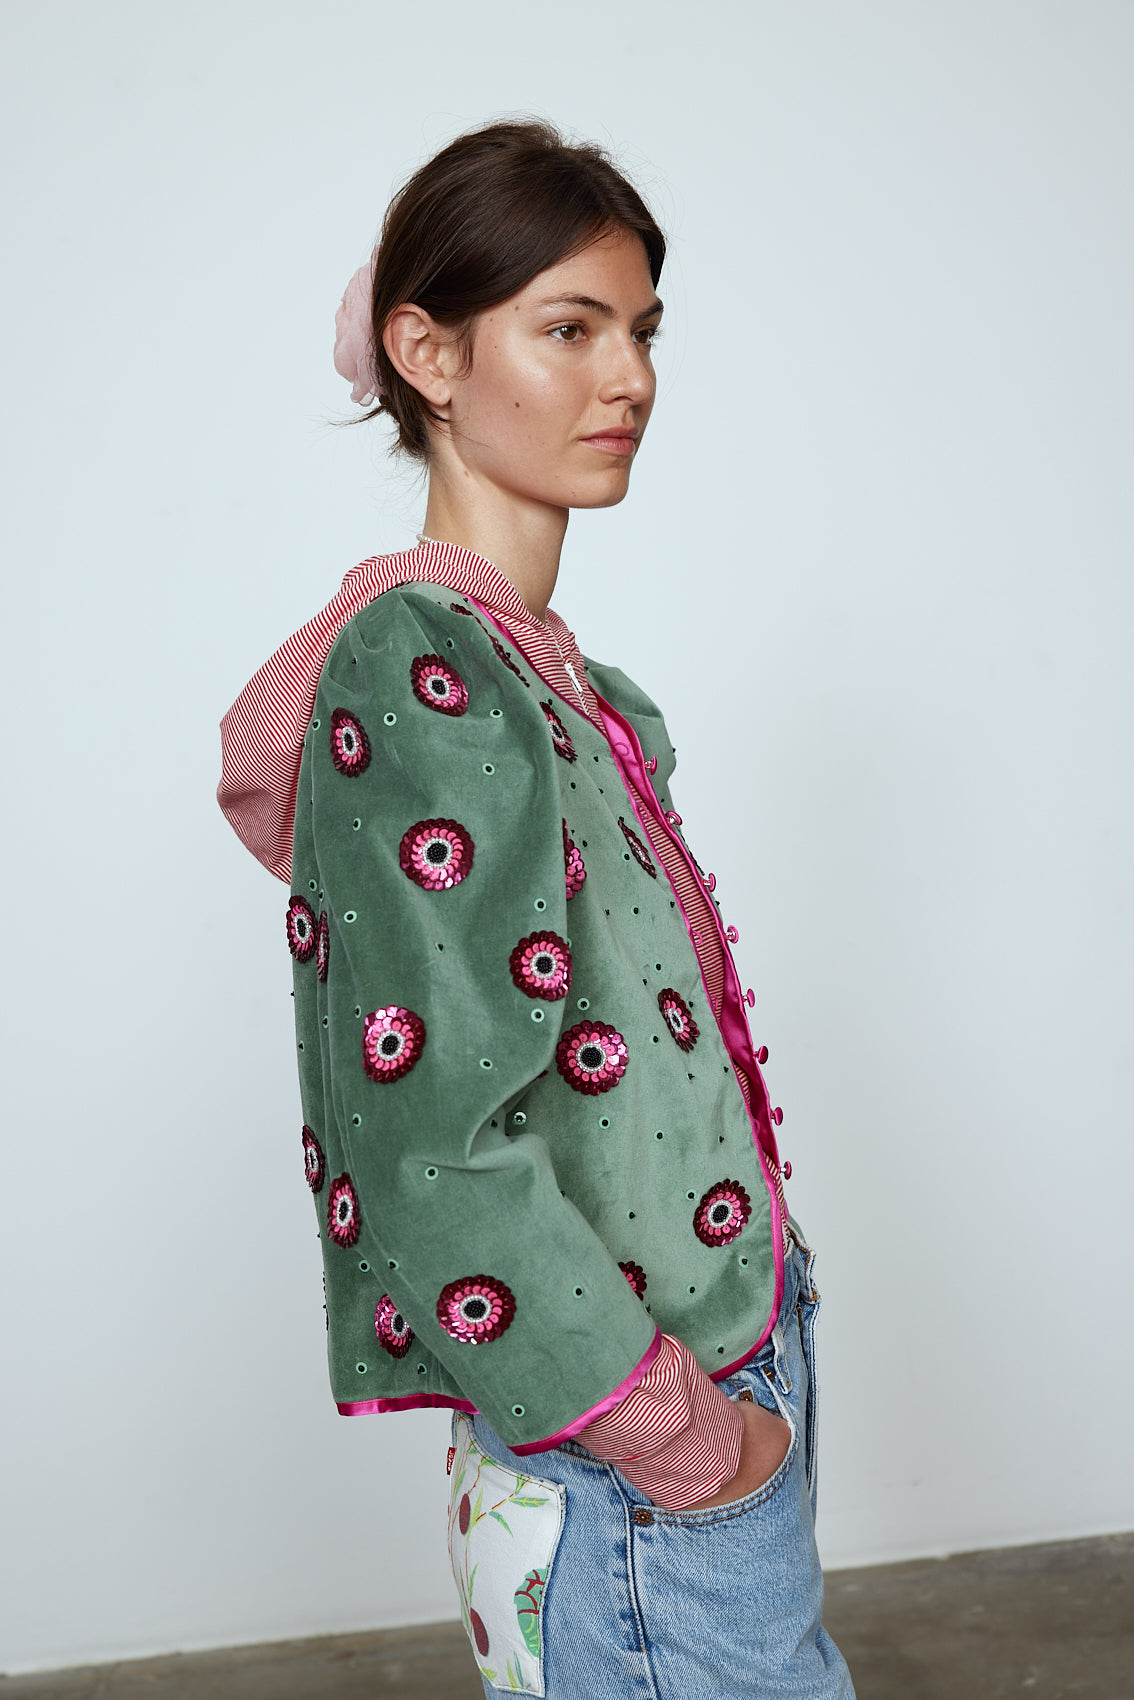 The Blanca Jacket in luxurious olive green silk velvet, exquisitely hand-embroidered by skilled artisans in our flower daisy pattern using beadings and sequins. The jacket features pink silk-button closings on the front and pink silk lining.